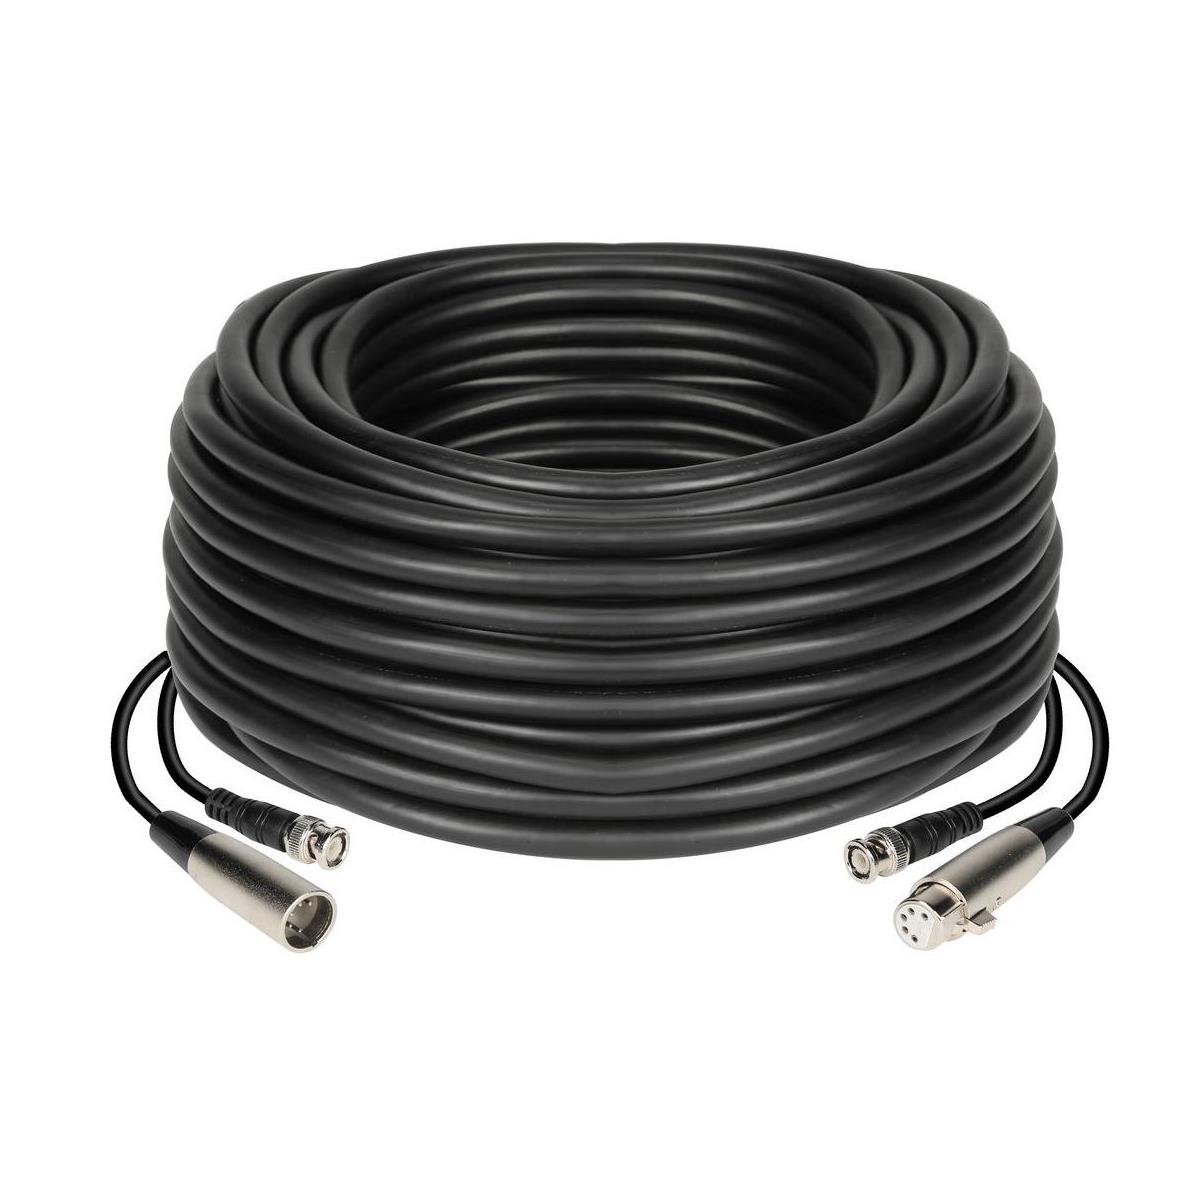 Image of Datavideo CB-47 50m/164.04' All In One Cable